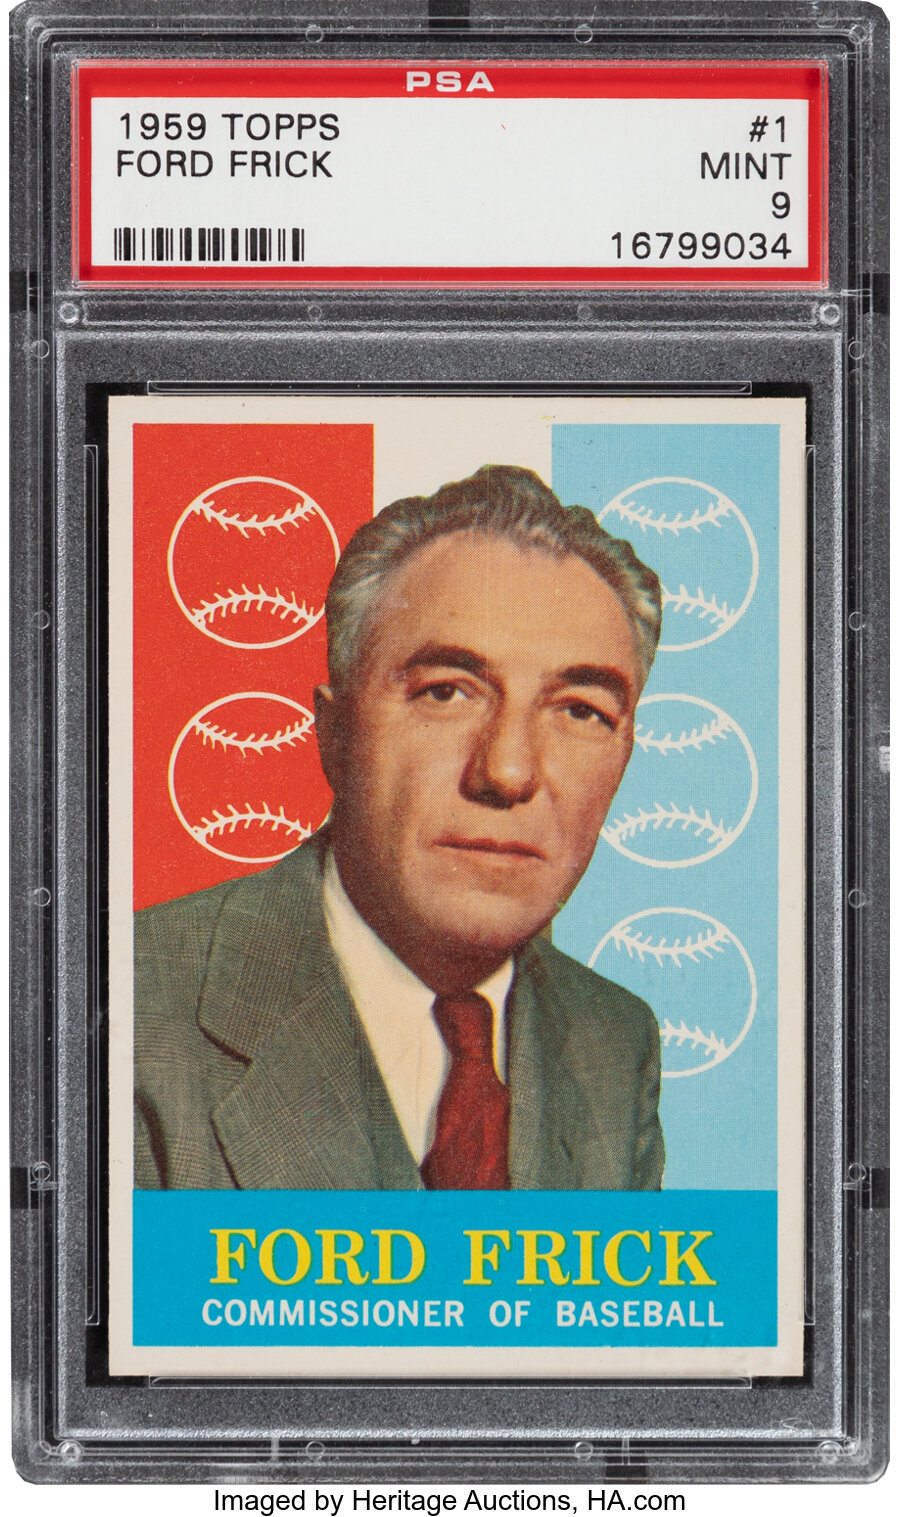 1959 Topps Ford Frick #1 PSA Mint 9 - None Higher!